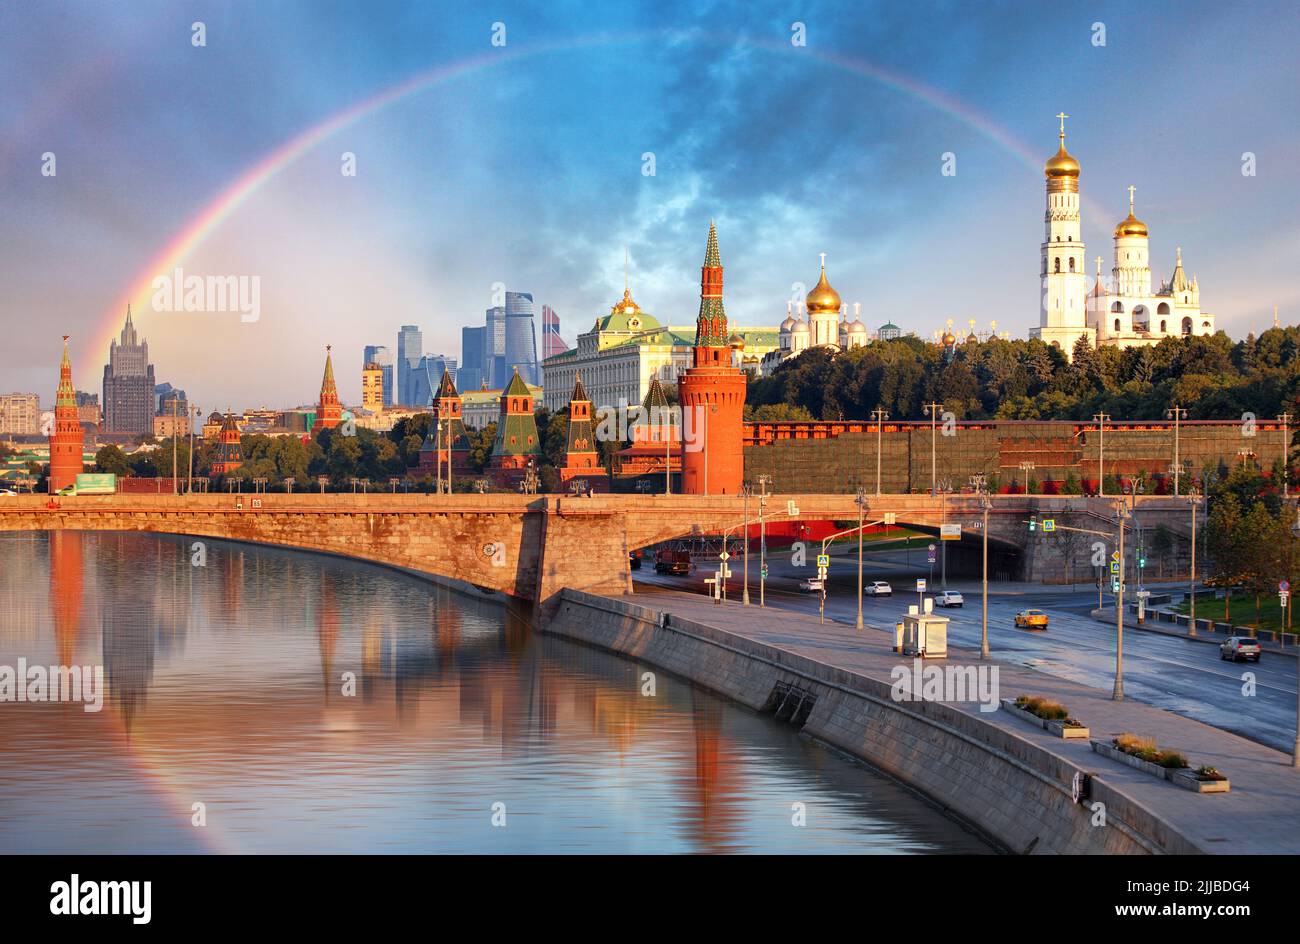 Russia, Moscow city skylinew with rainbow Stock Photo